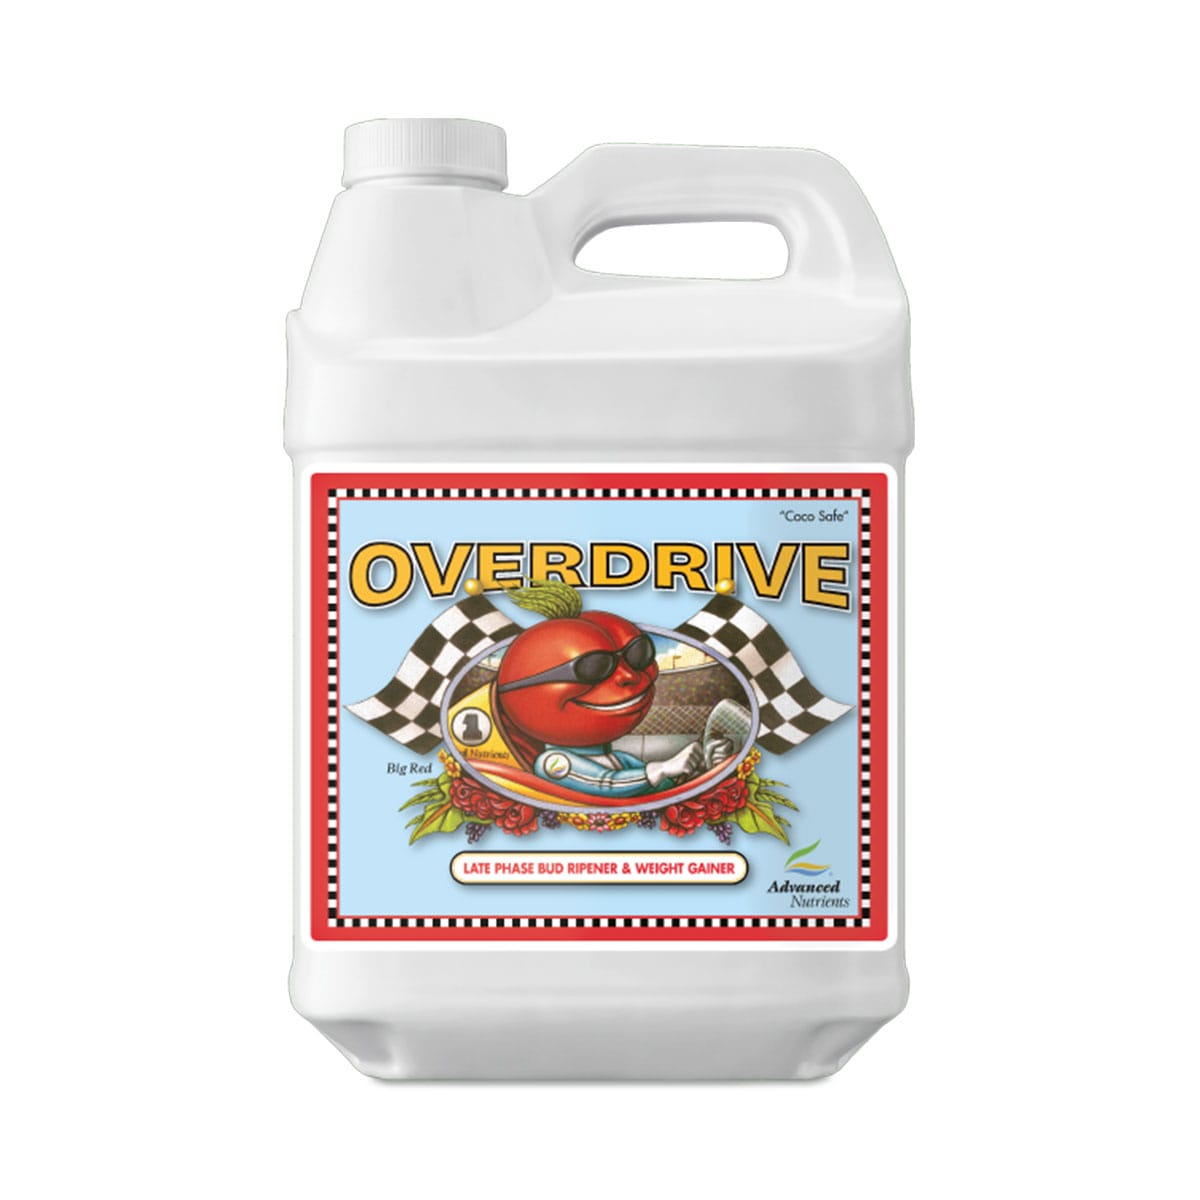 Advanced Nutrients Overdrive .5 Liter